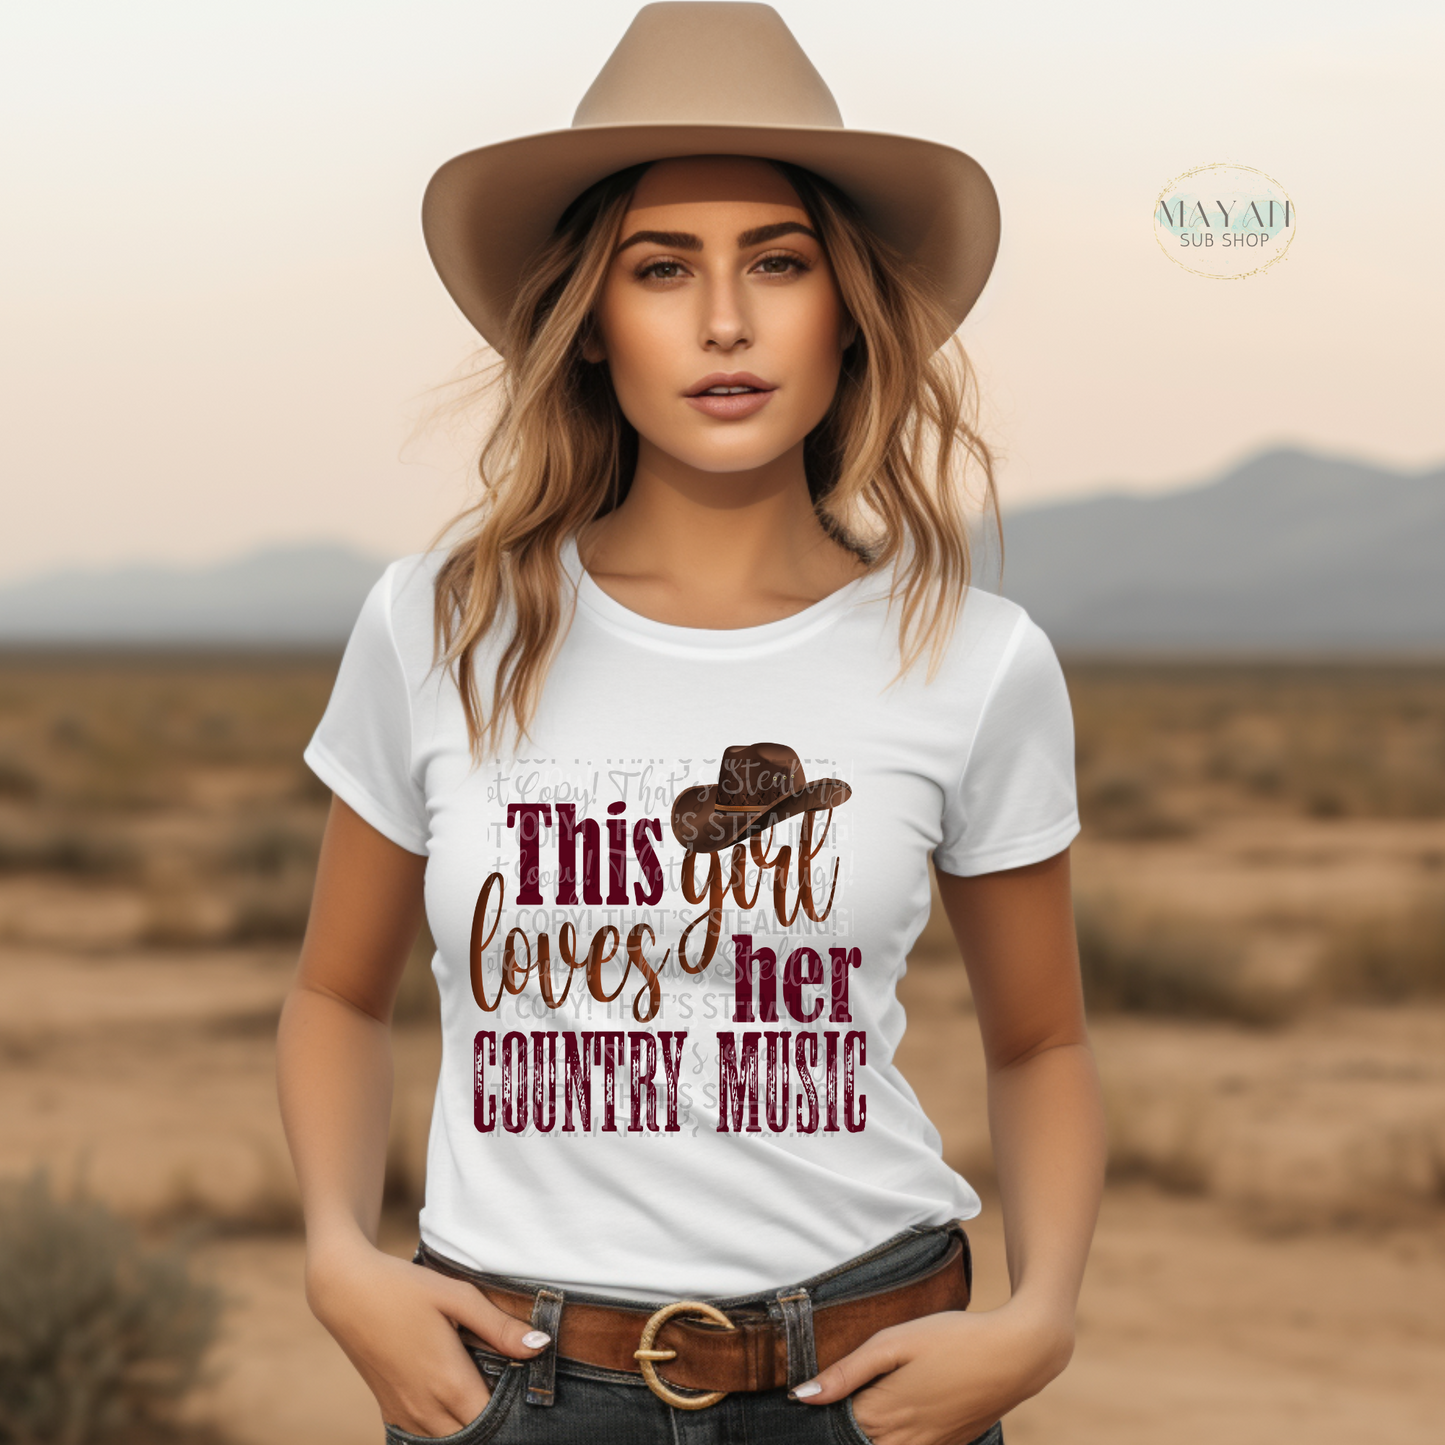 This girl loves her country music shirt. -Mayan Sub Shop